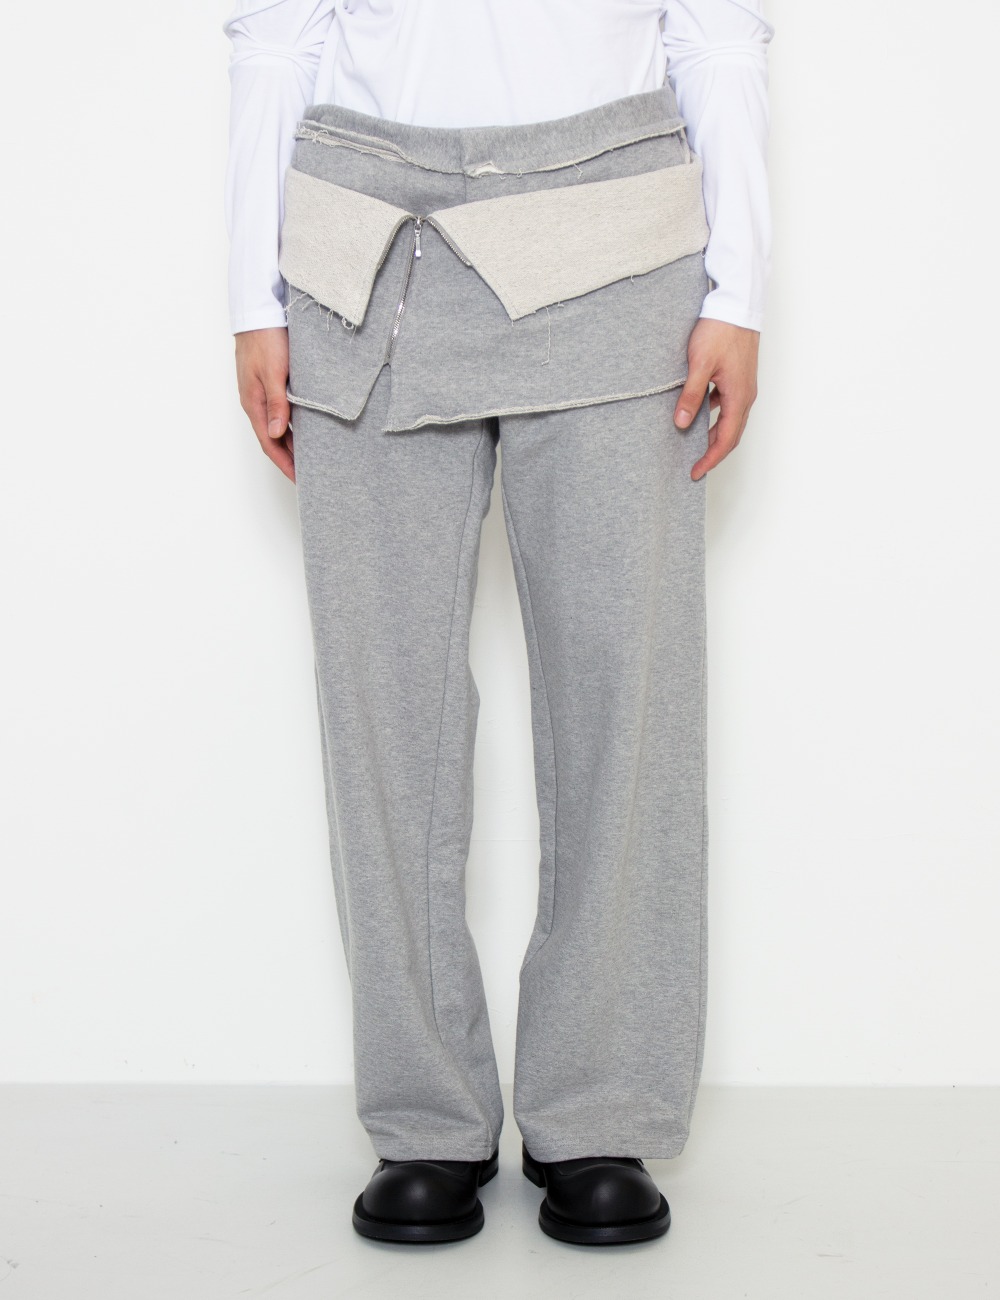 GREY SWEATPANTS WITH SKIRT PLEATED SKIRT DETAIL_GREY